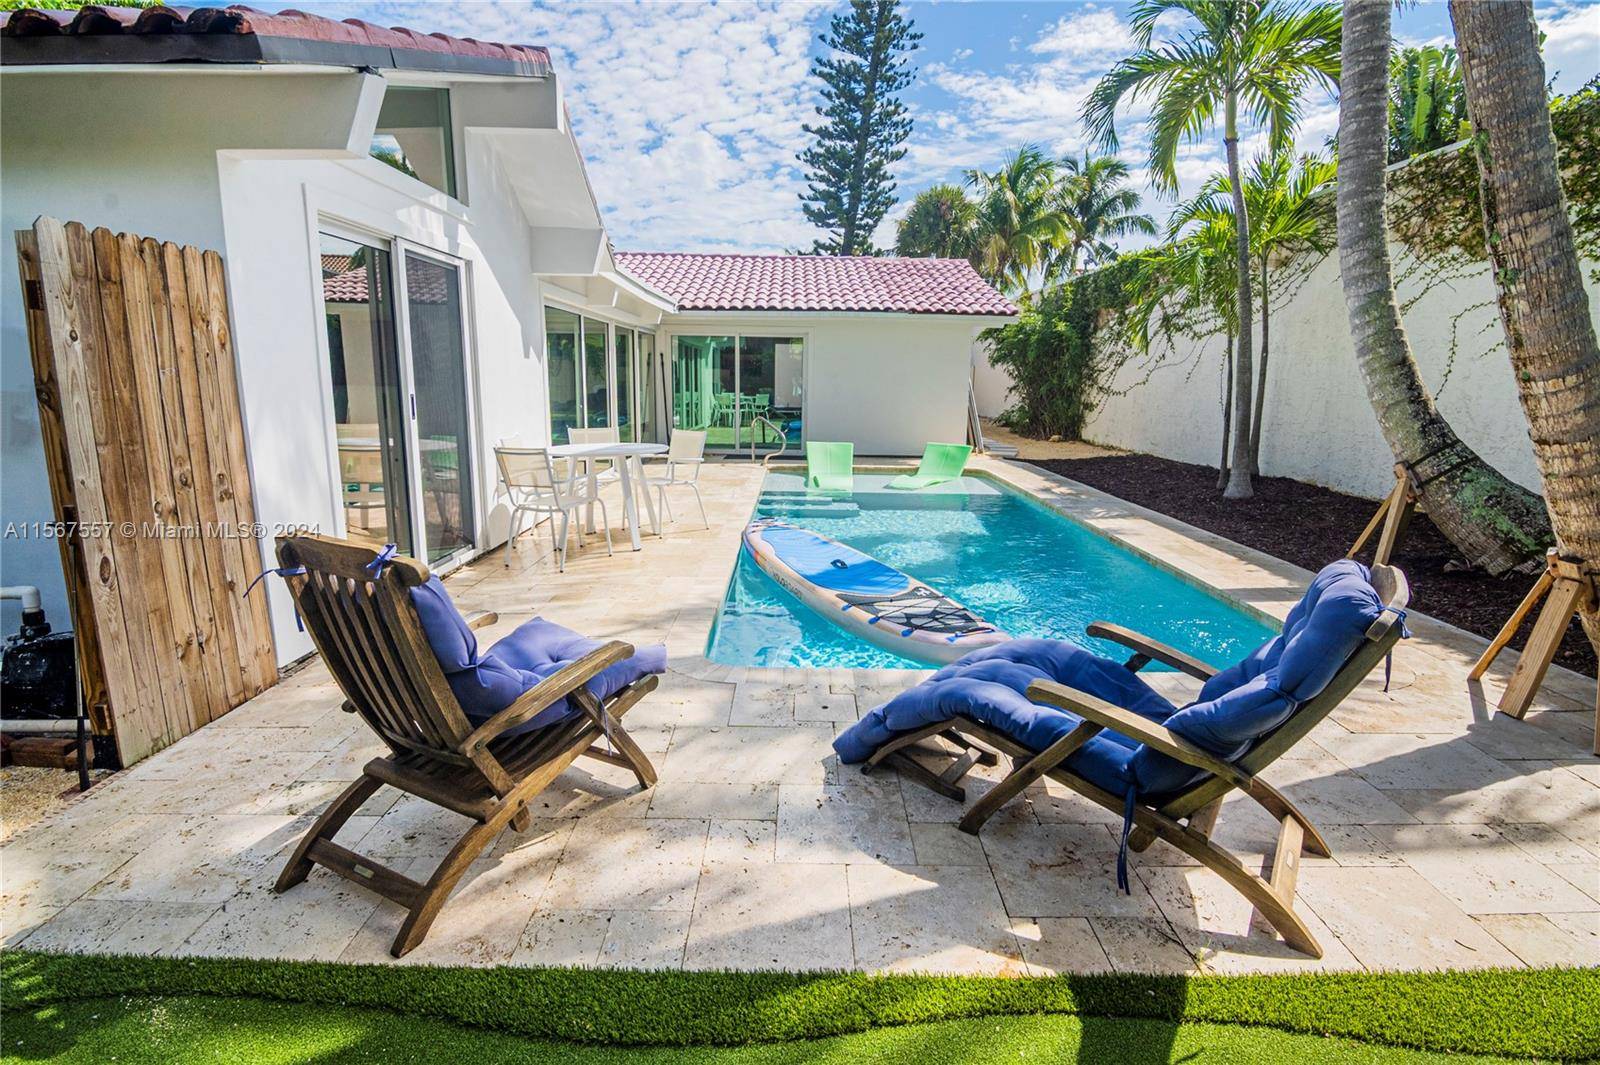 Walk to the beach from this private pool spa home in a gated Jupiter beach community.